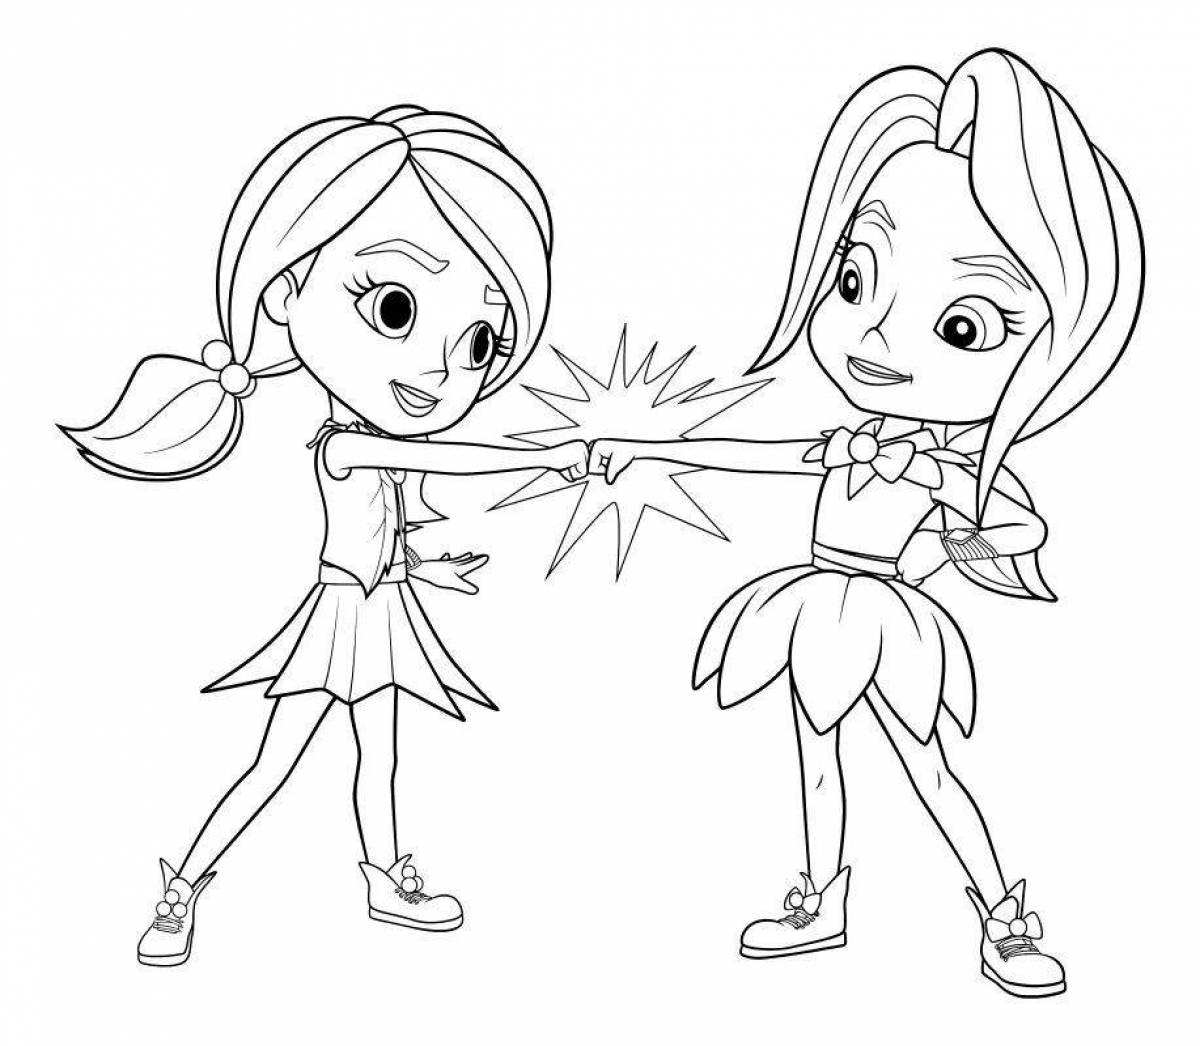 Colorful fairy coloring pages